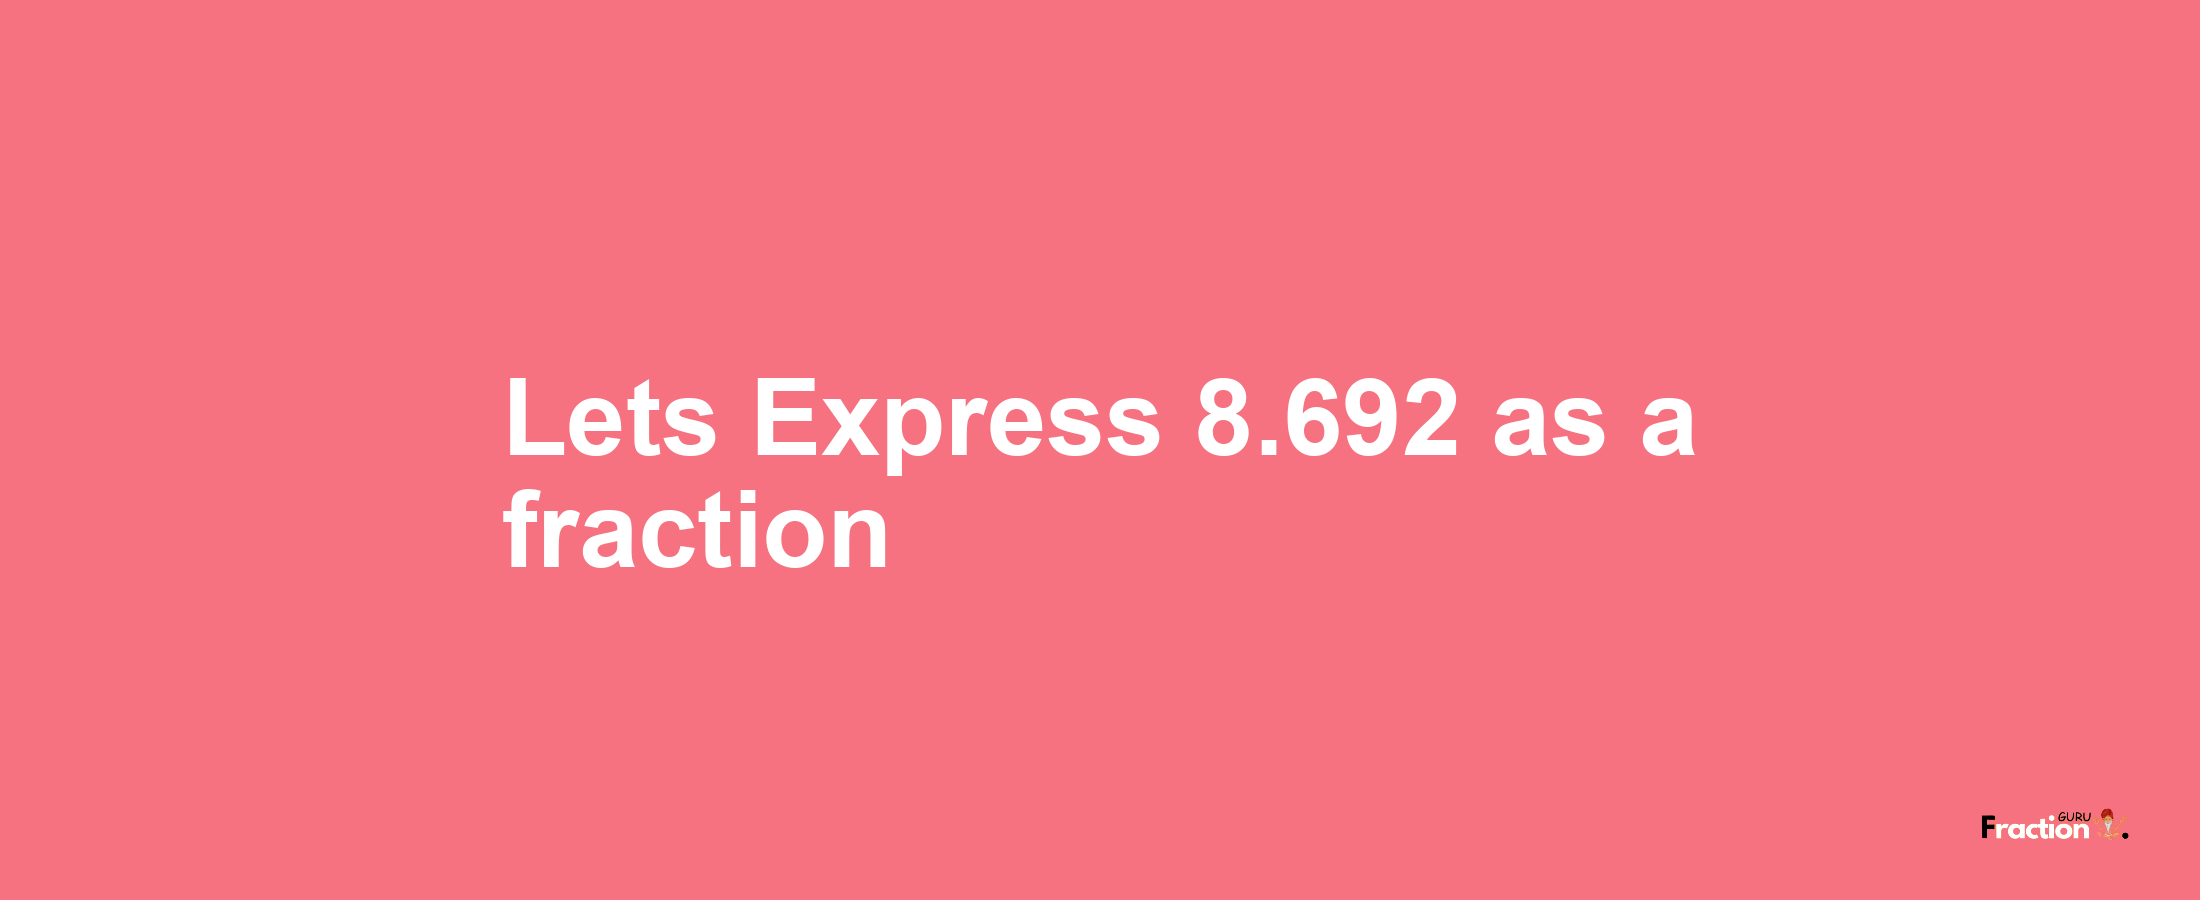 Lets Express 8.692 as afraction